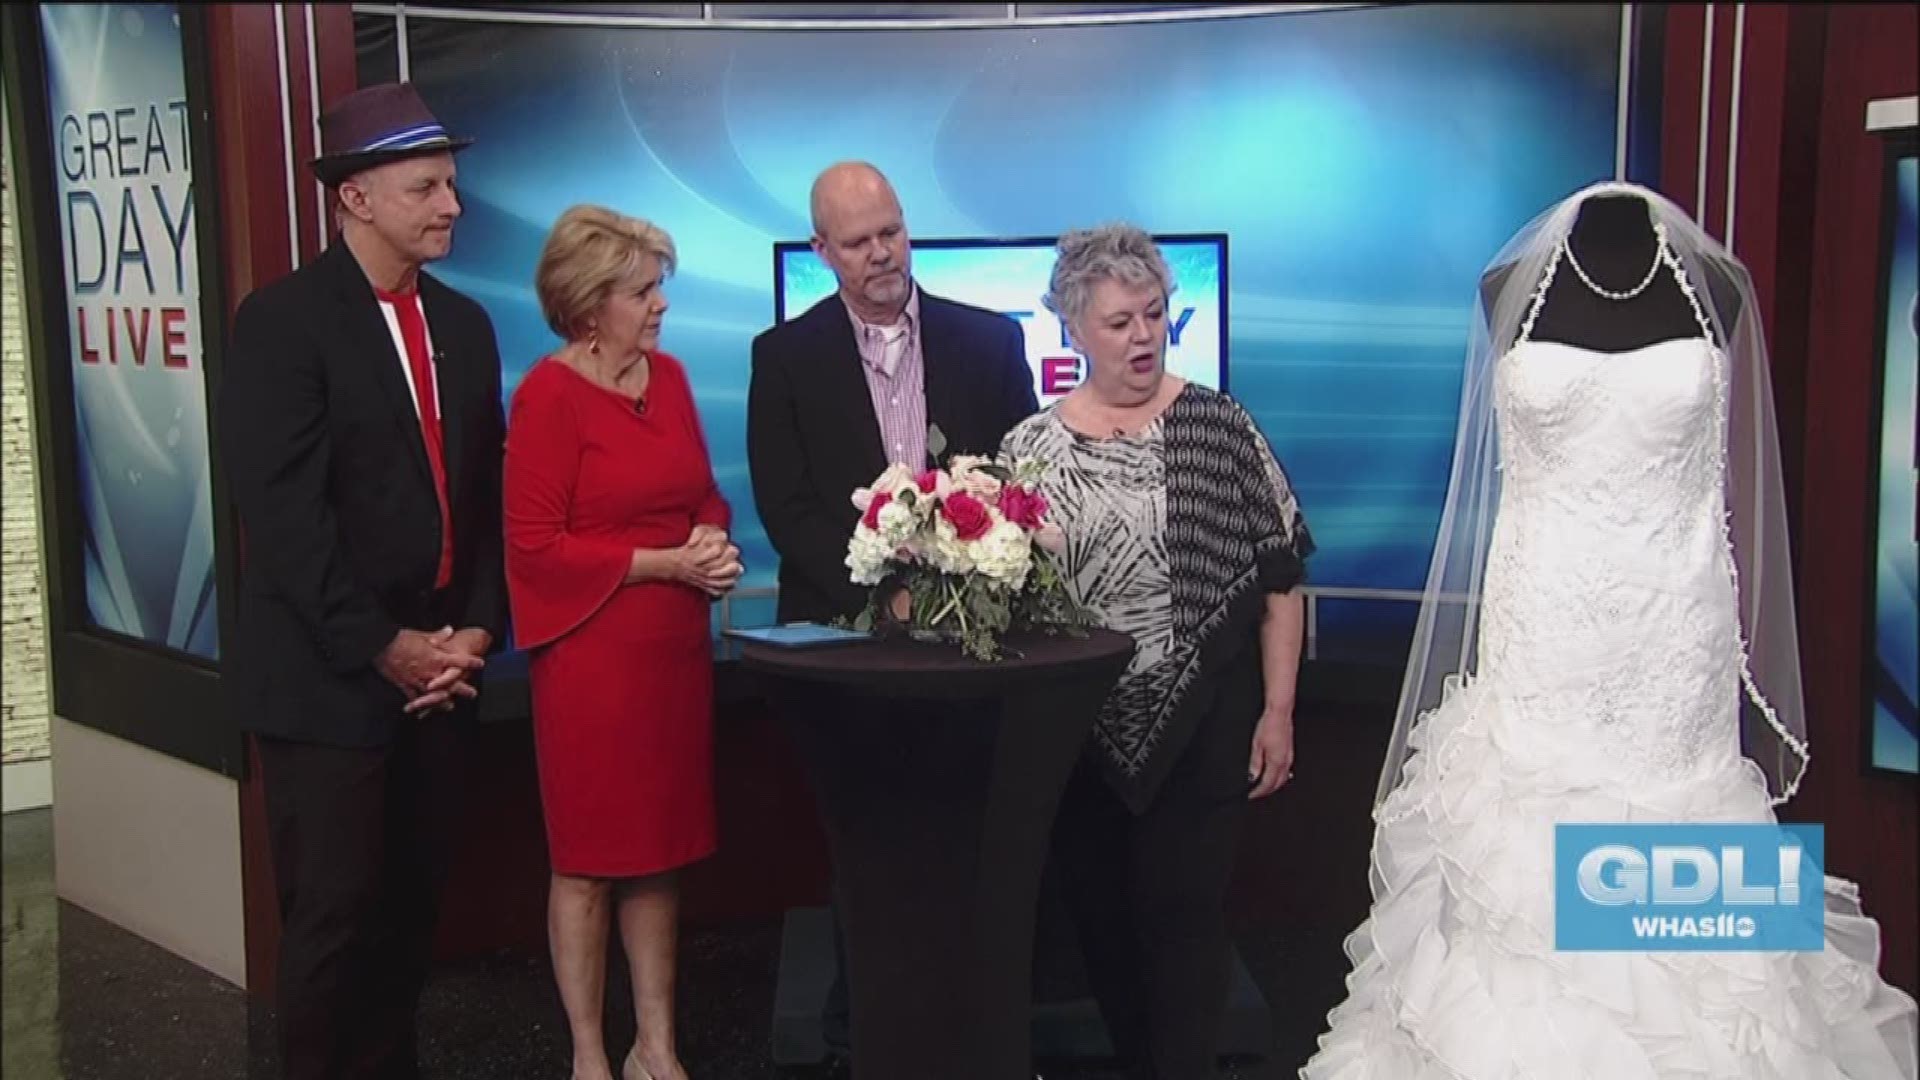 Mike Gaddie and Barbara Decker are just two of ninety seasoned professionals in the Louisville Wedding Network that organize wedding shows, where everything from cakes to flowers to finding the right venue can be found under one roof. The Kentucky Wedding